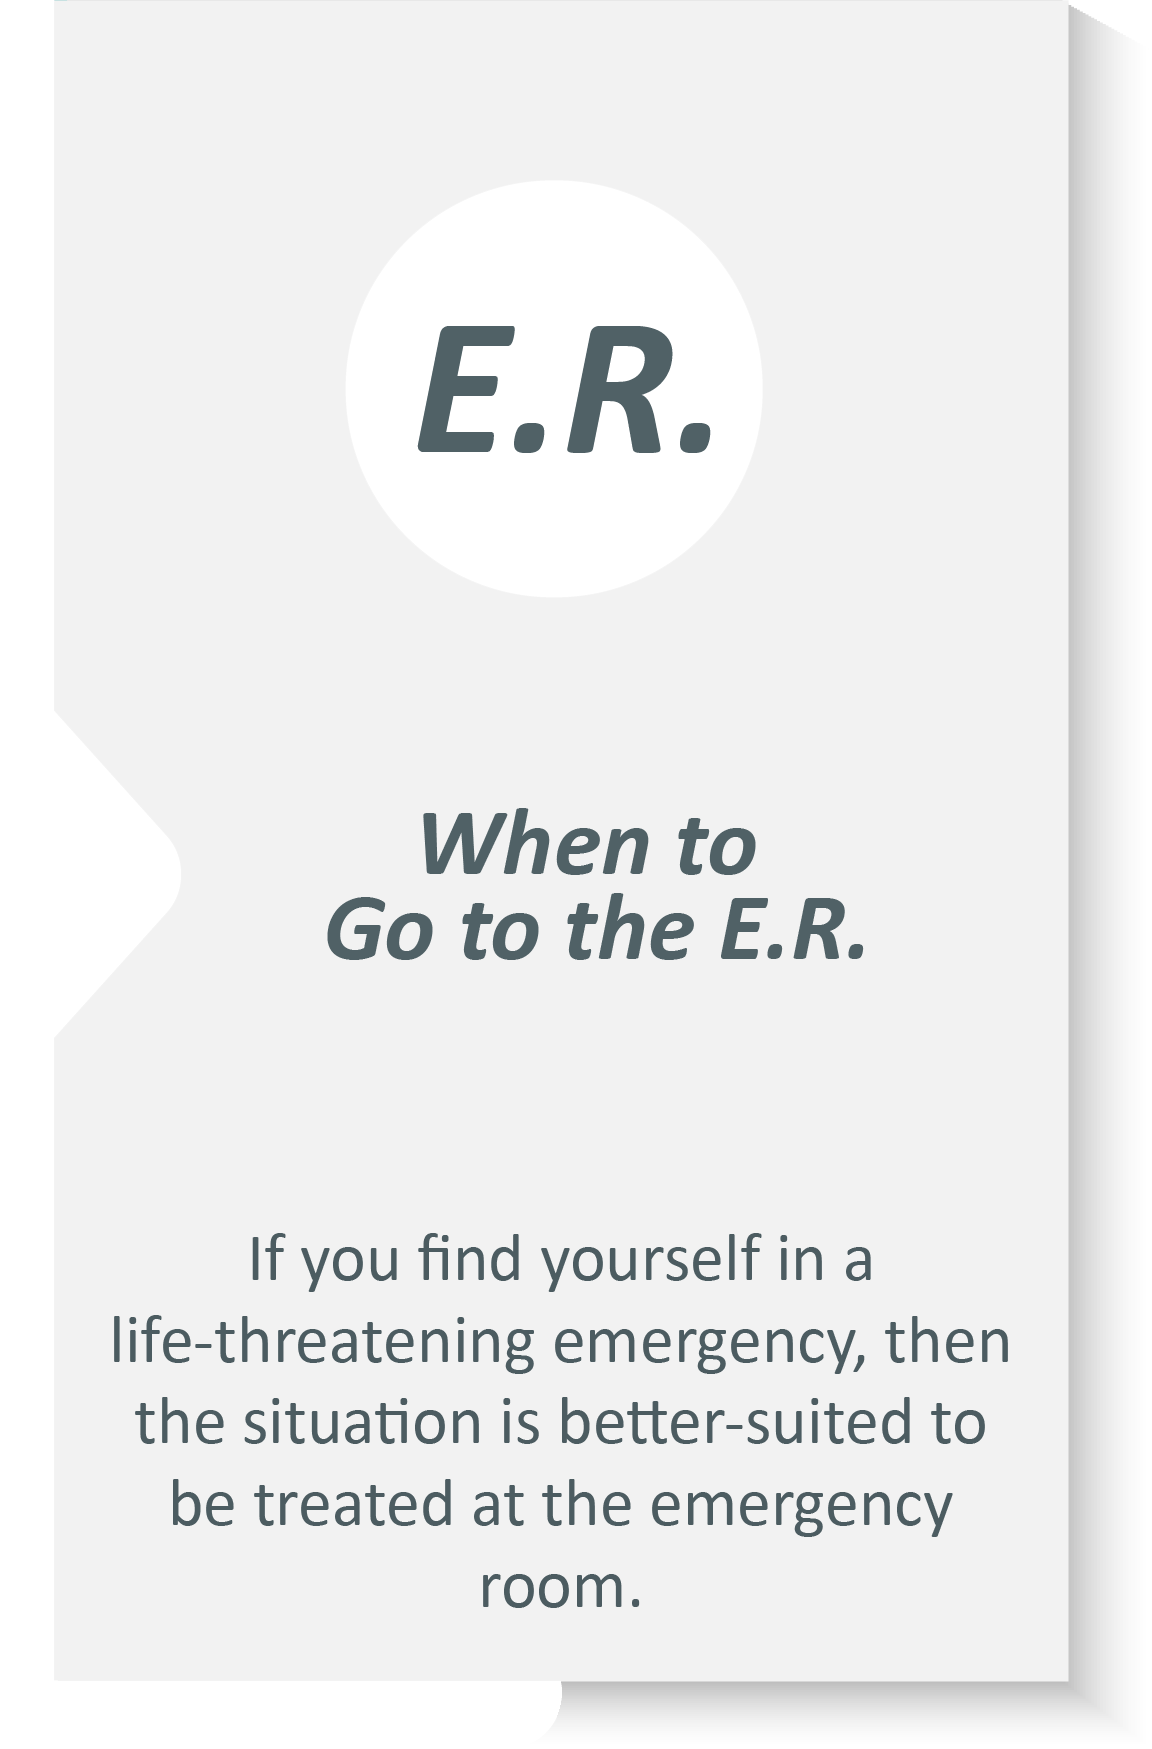 Emergency dentist infographic: If you find yourself in a life-threatening emergency, then the situation is better-suited to be treated at the emergency room.